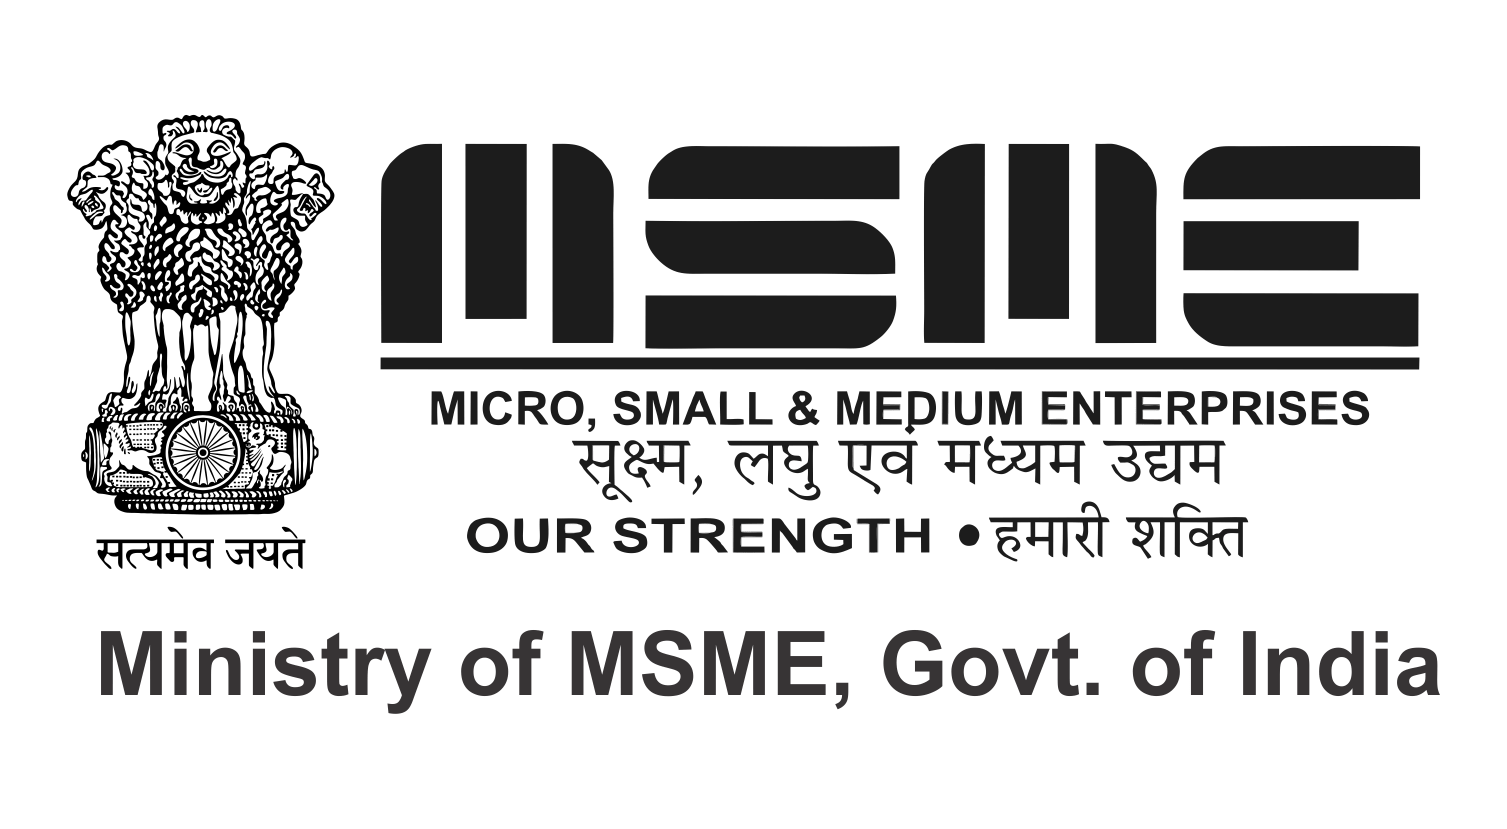 Ministry of micro, small and medium enterprises